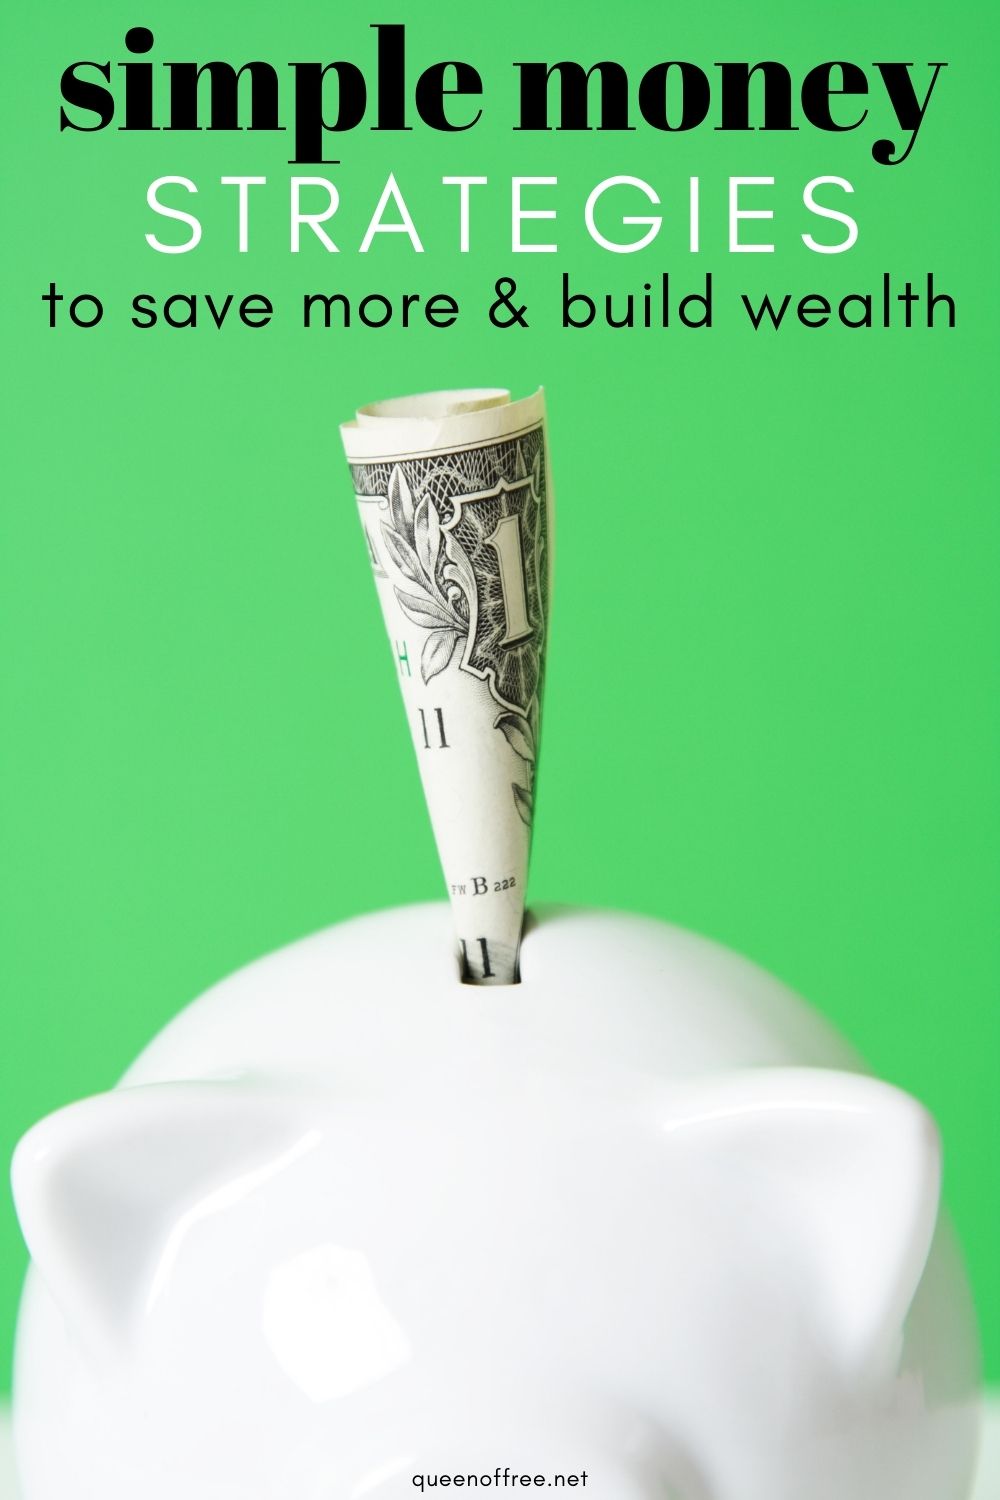 Don't overcomplicate things. Follow these 5 Simple Money Strategies to save more and begin building wealth today!